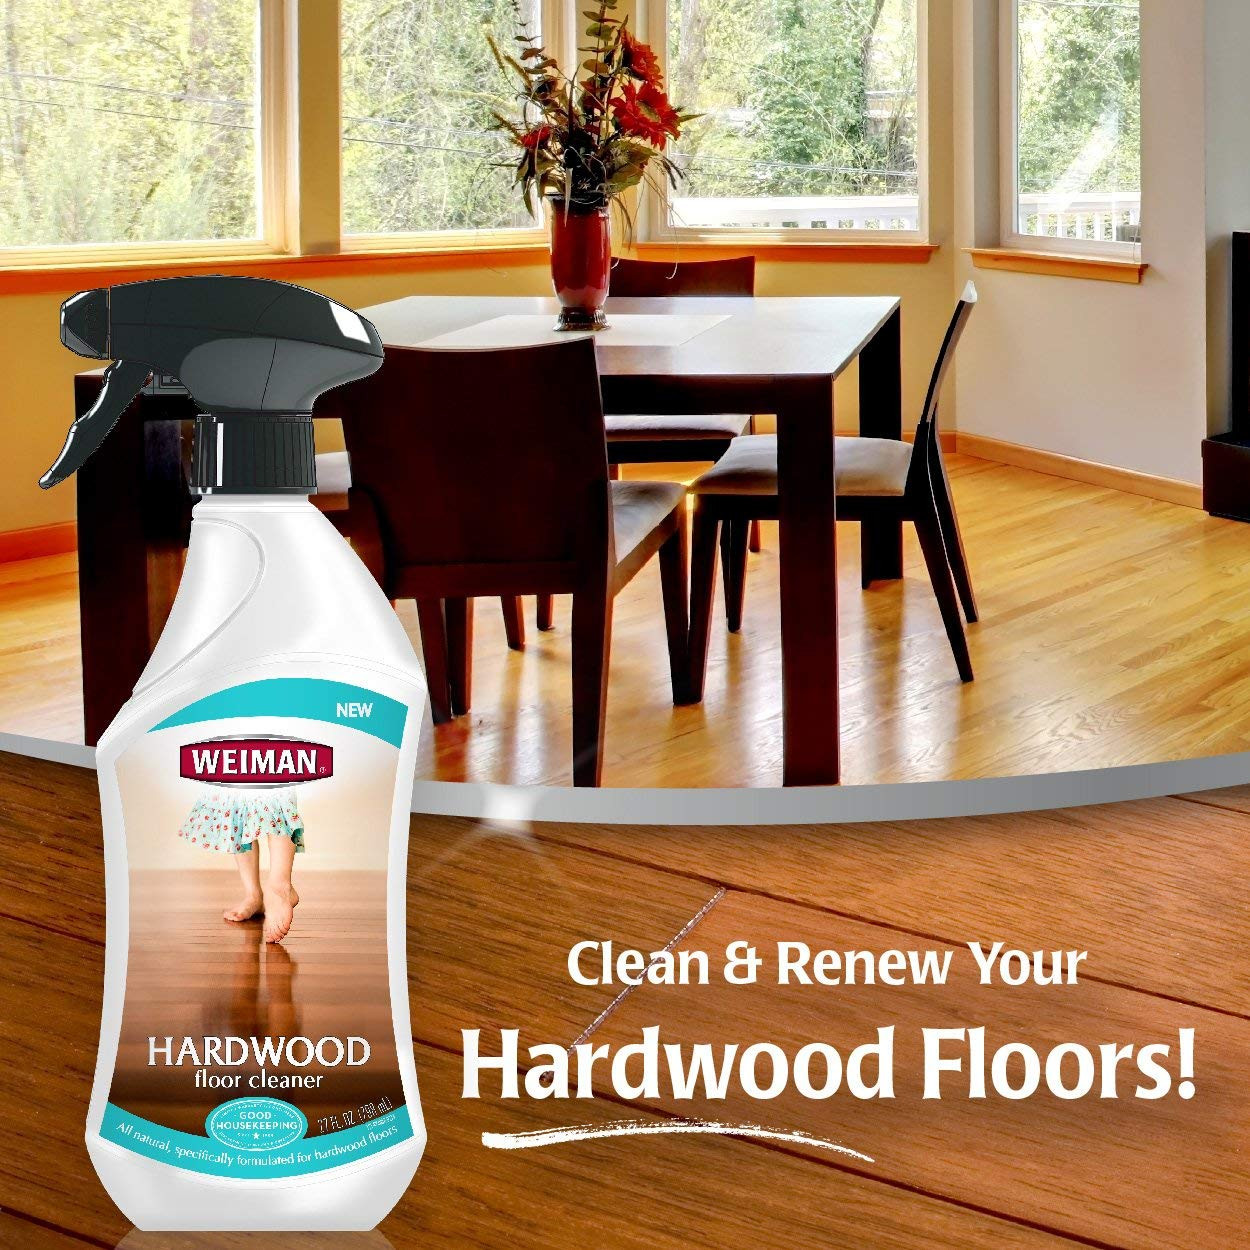 14 Fashionable How to Make Hardwood Floor Cleaner 2024 free download how to make hardwood floor cleaner of amazon com weiman hardwood floor cleaner surface safe no harsh within amazon com weiman hardwood floor cleaner surface safe no harsh scent safe for use 